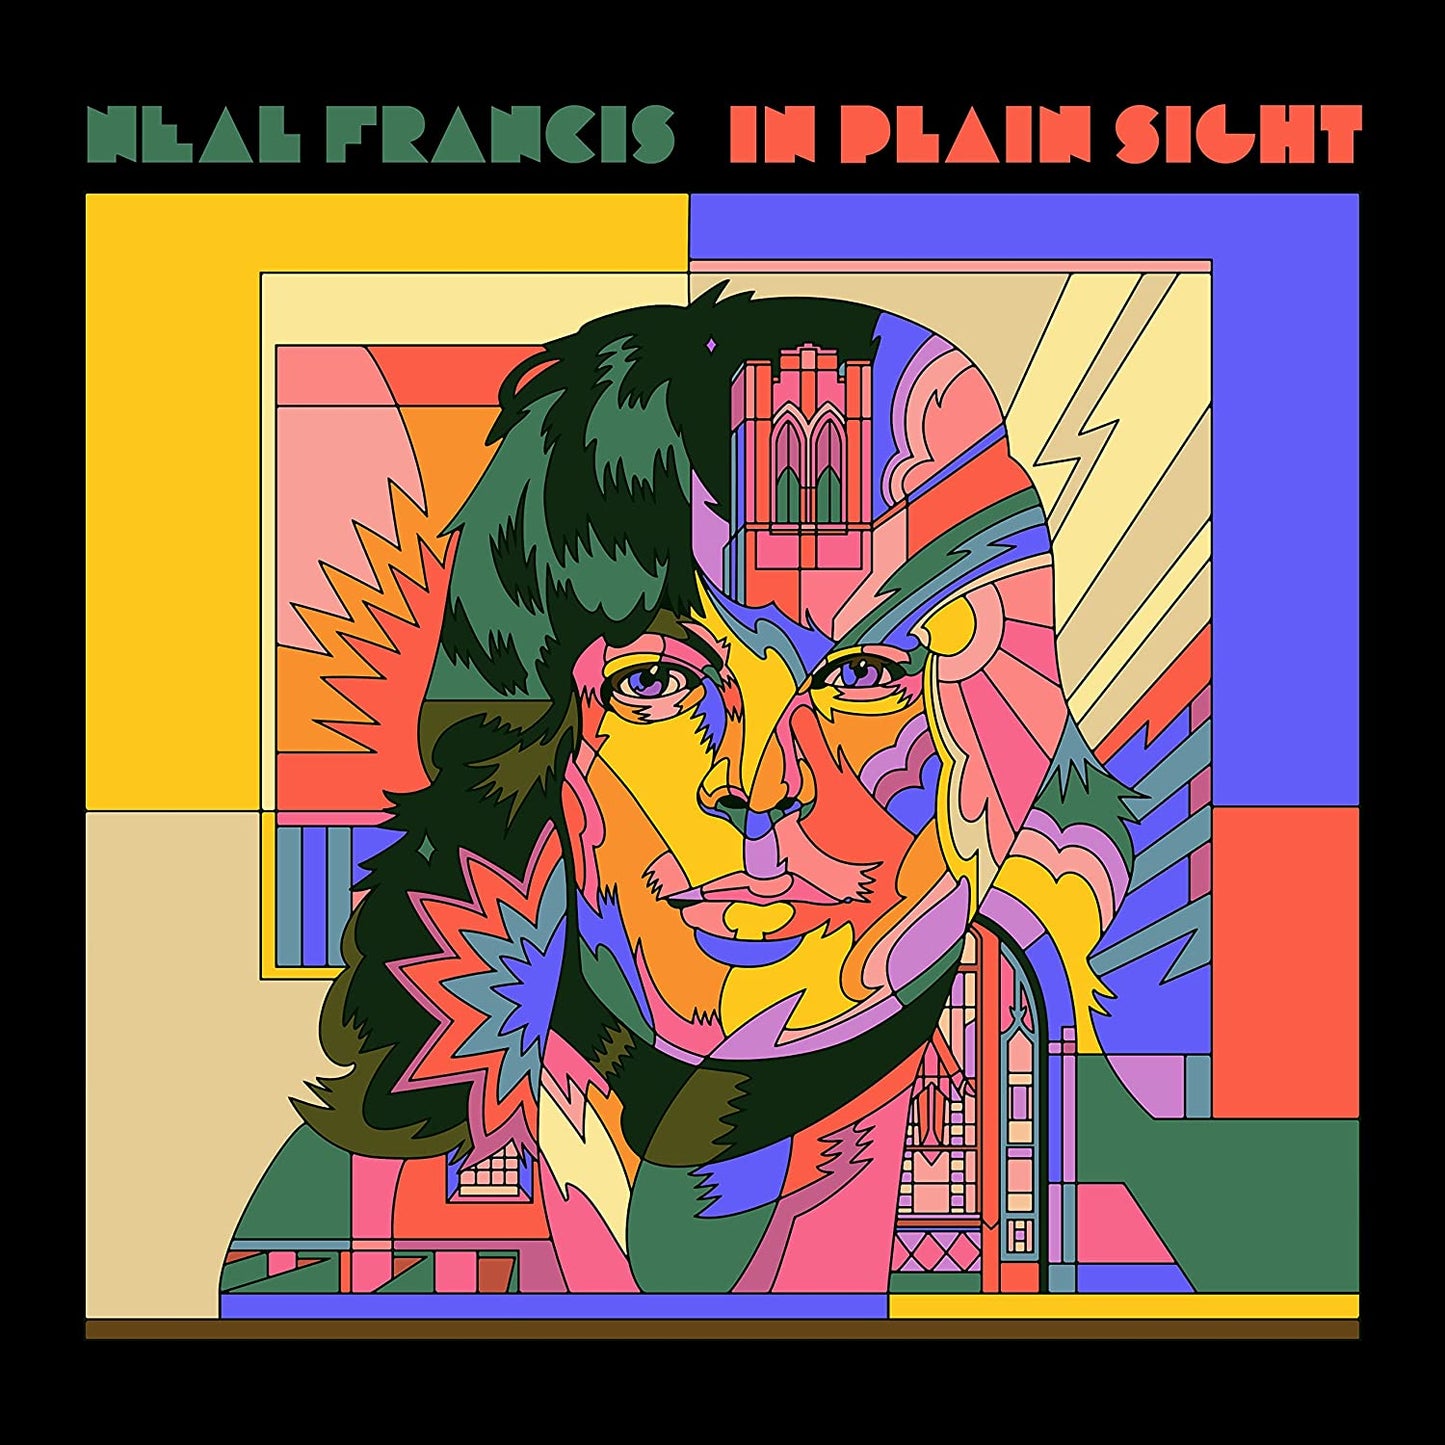 Neal Francis - In Plain Sight - CD